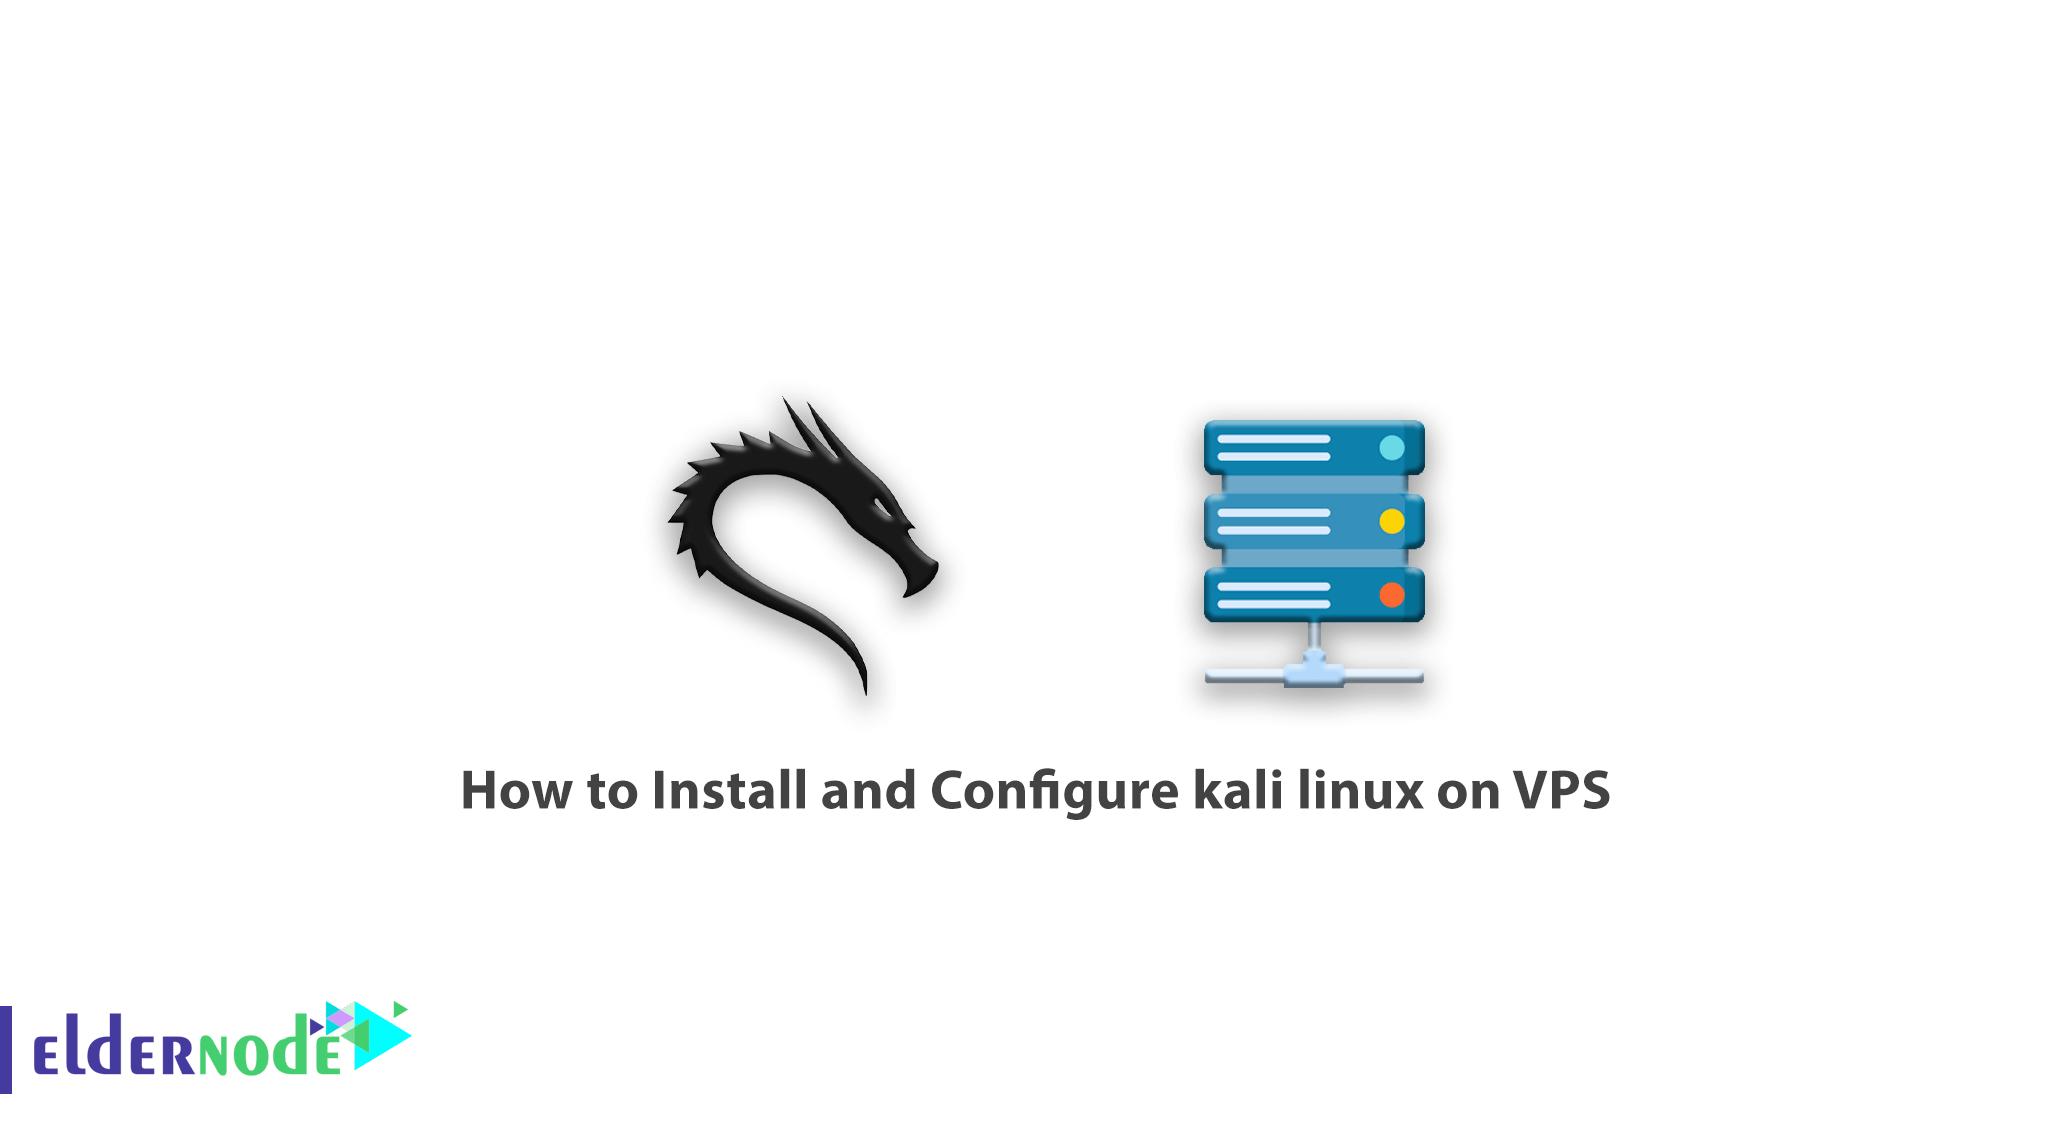 How to Install and Configure kali linux on VPS